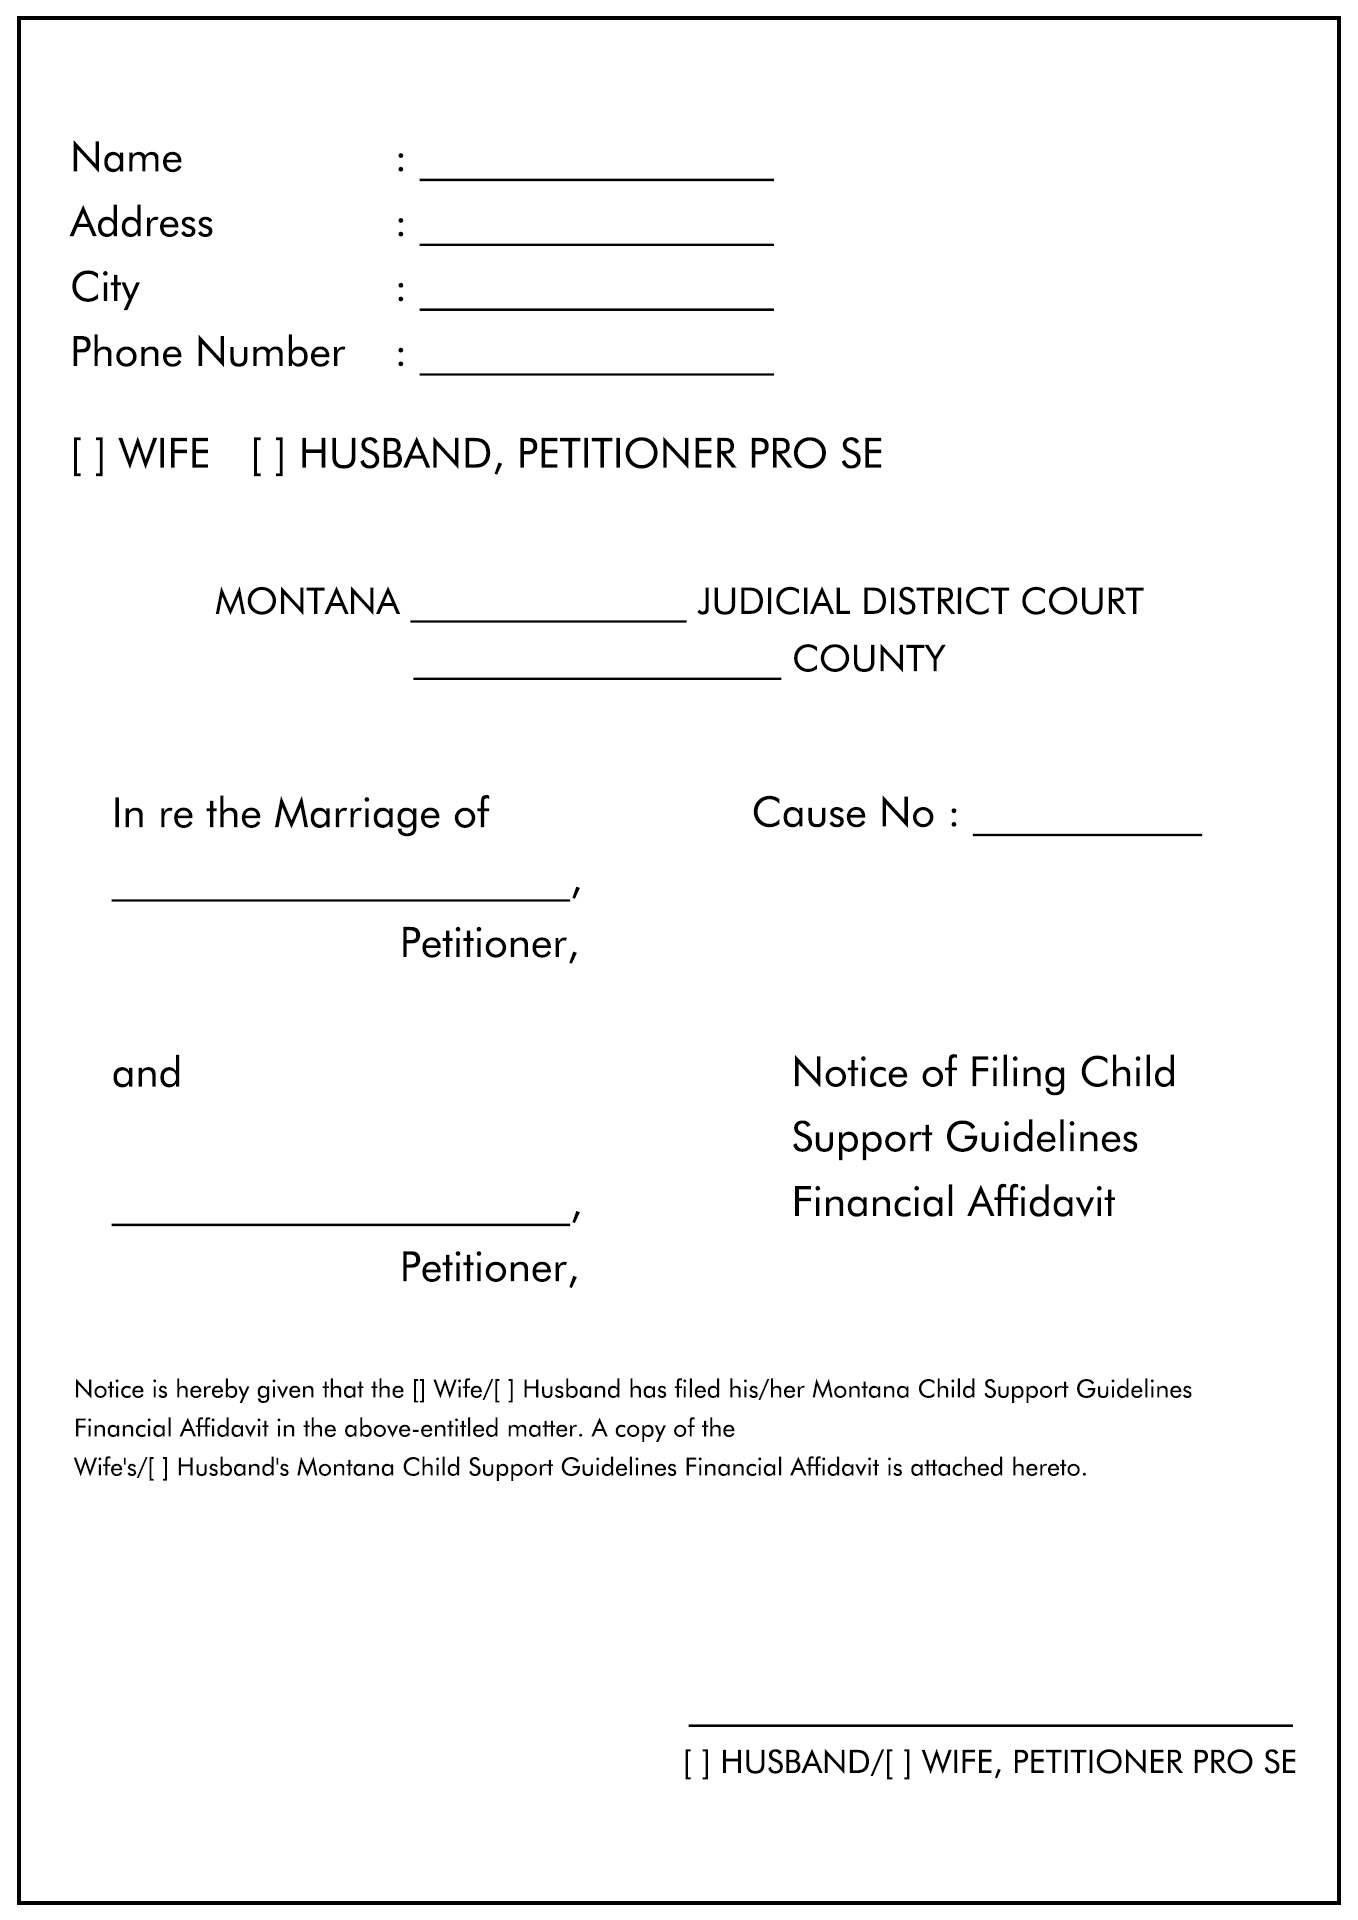 Fake Divorce Papers Printable Coloring Pages Image